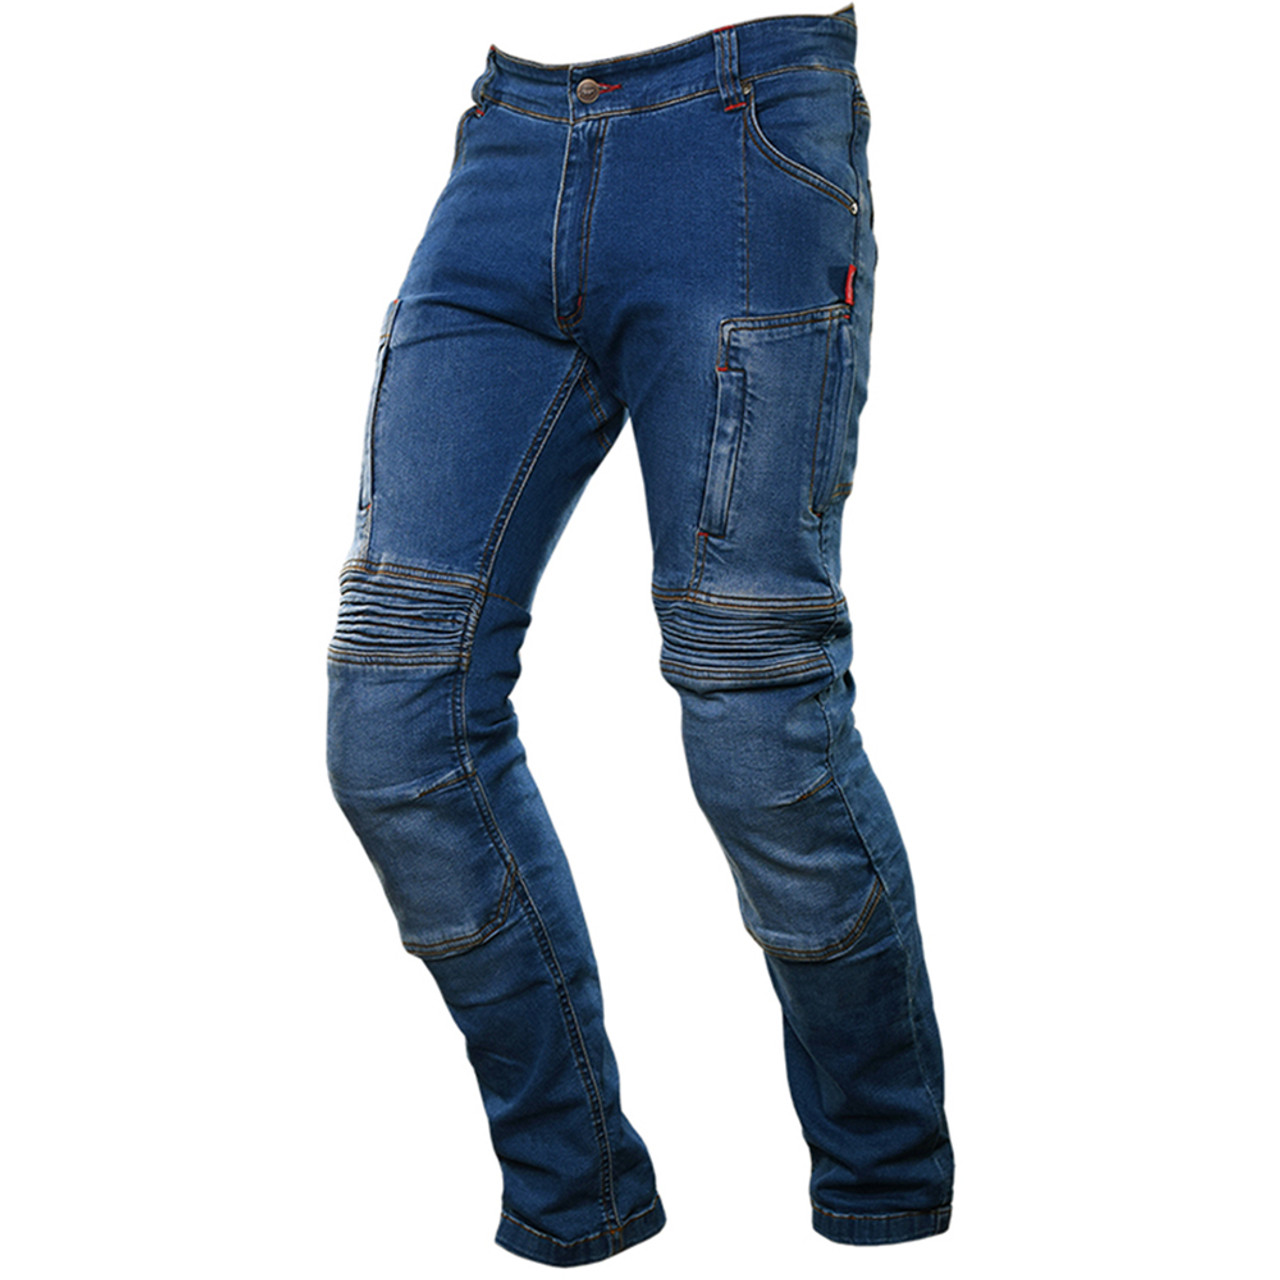 Kevlar motorcycle jeans with patented protection